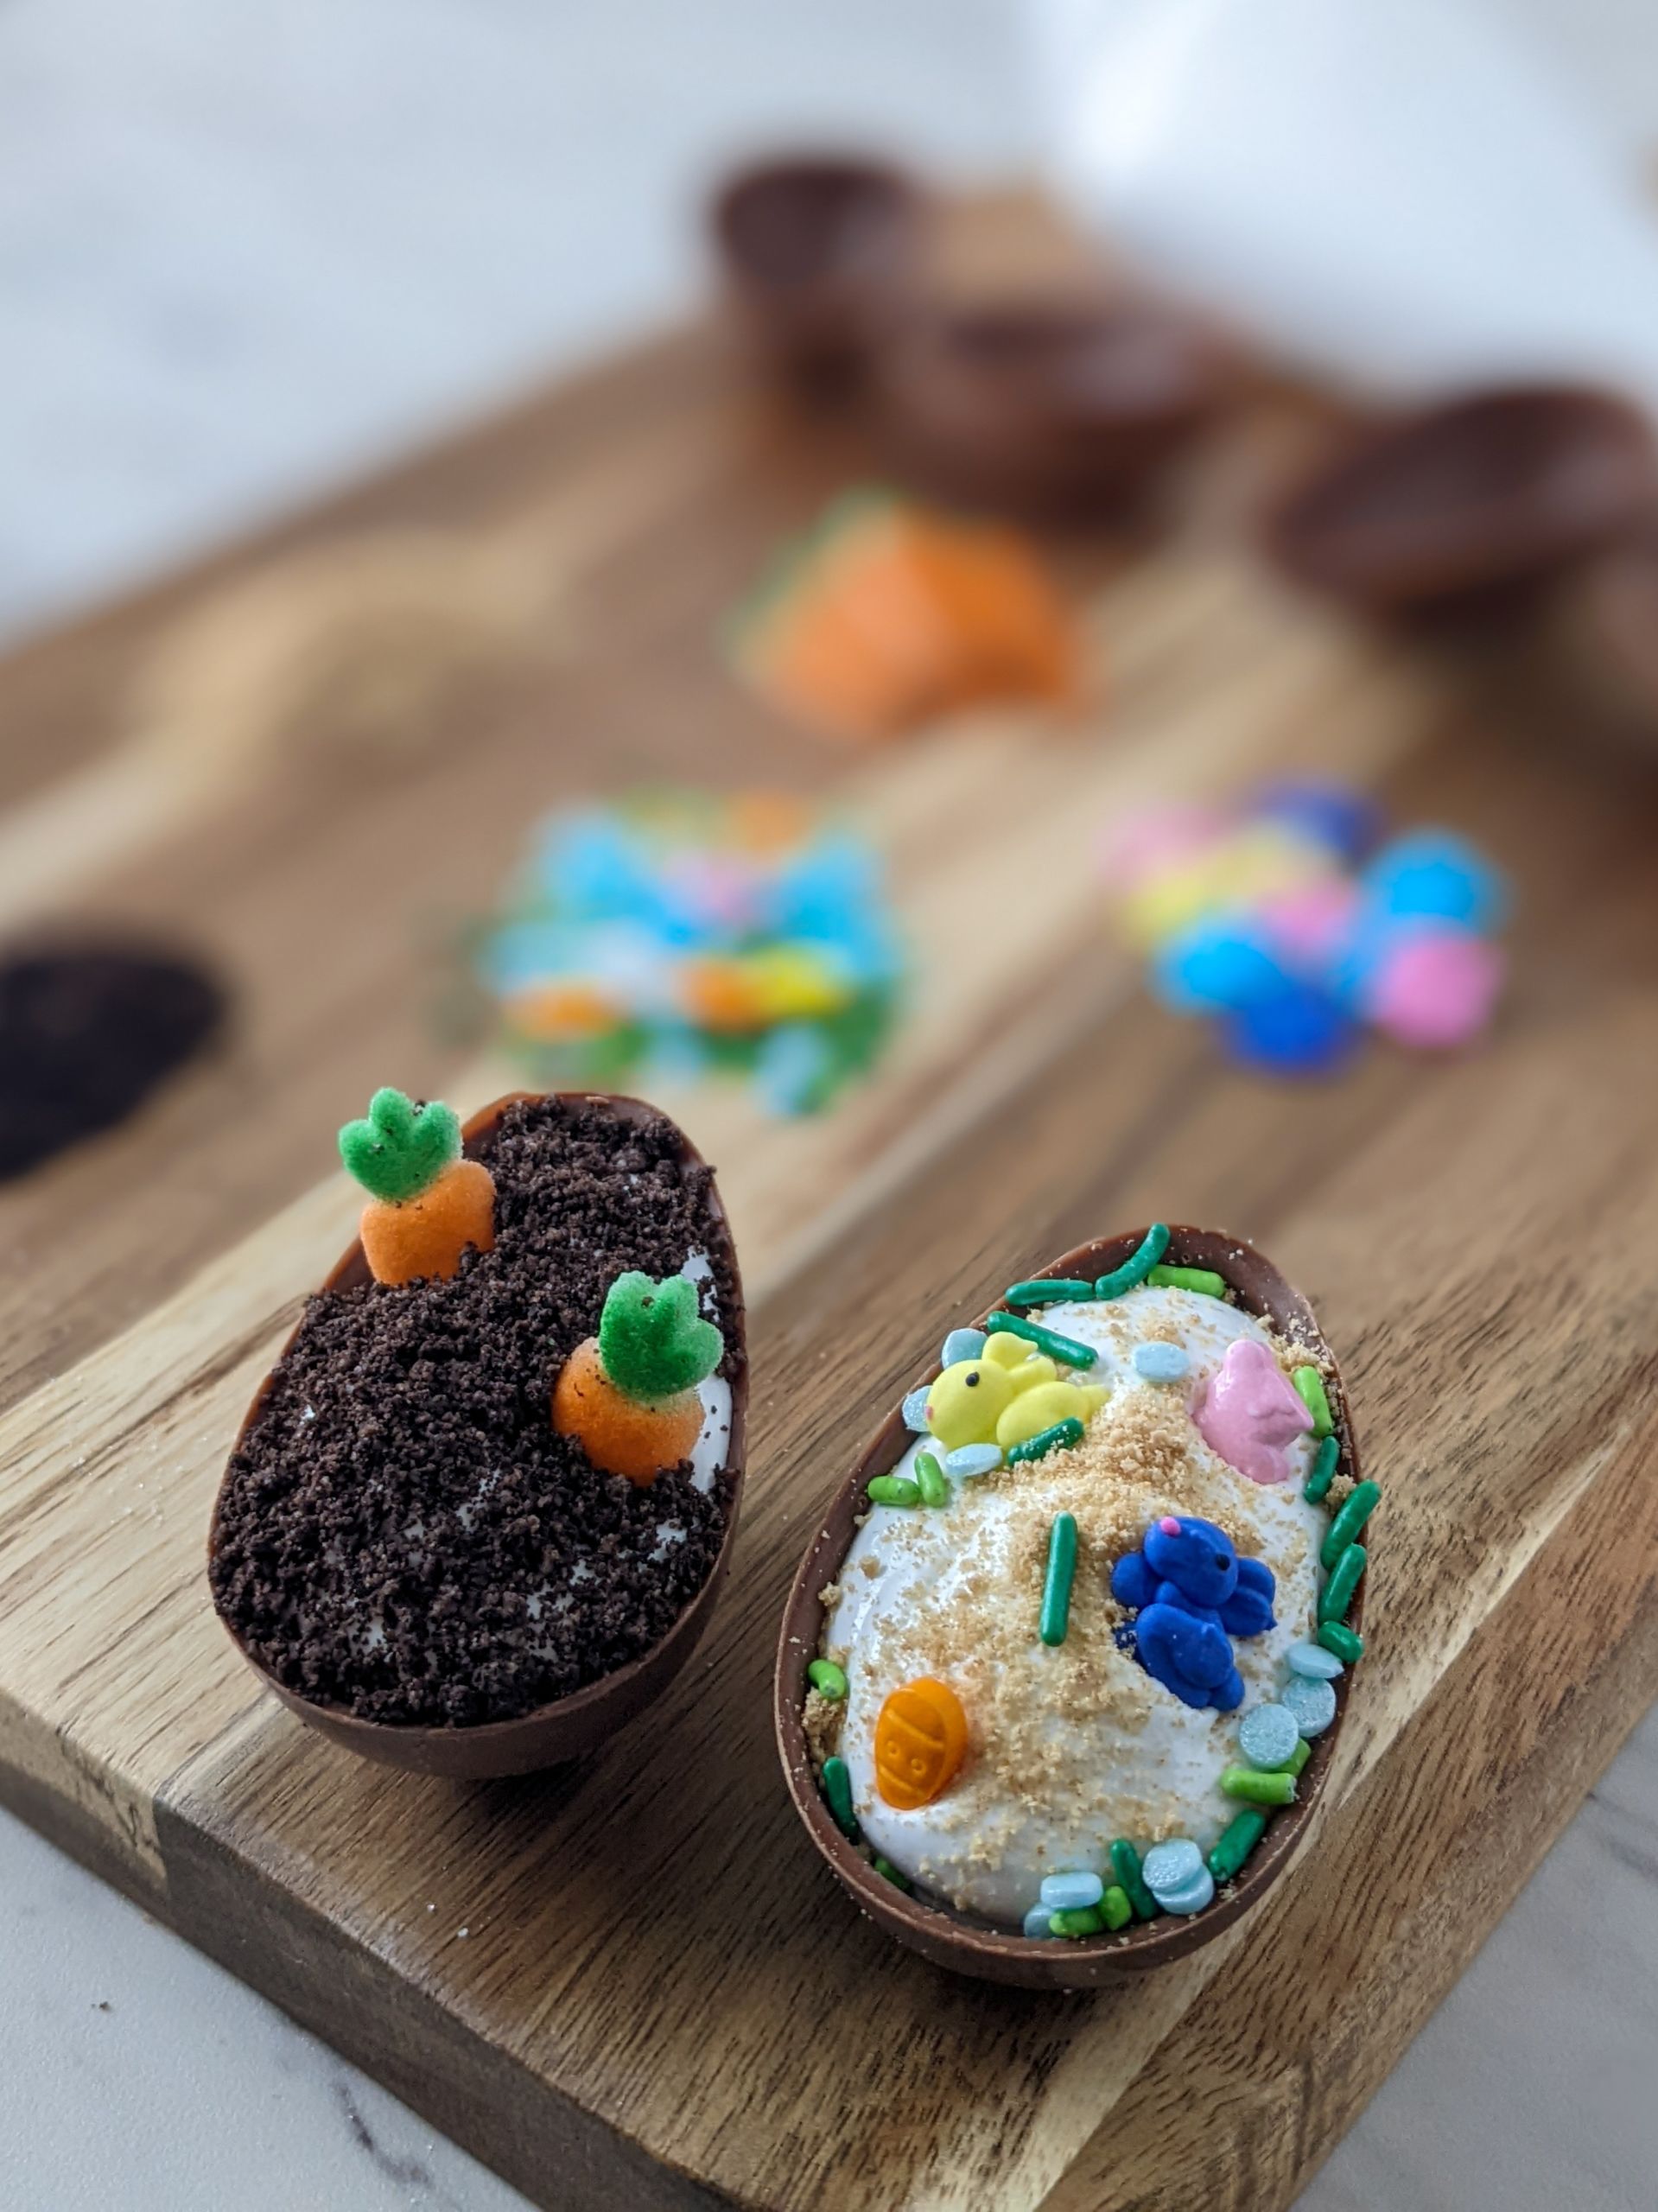 A photo of two chocolate eggs filled with cookie crumbles